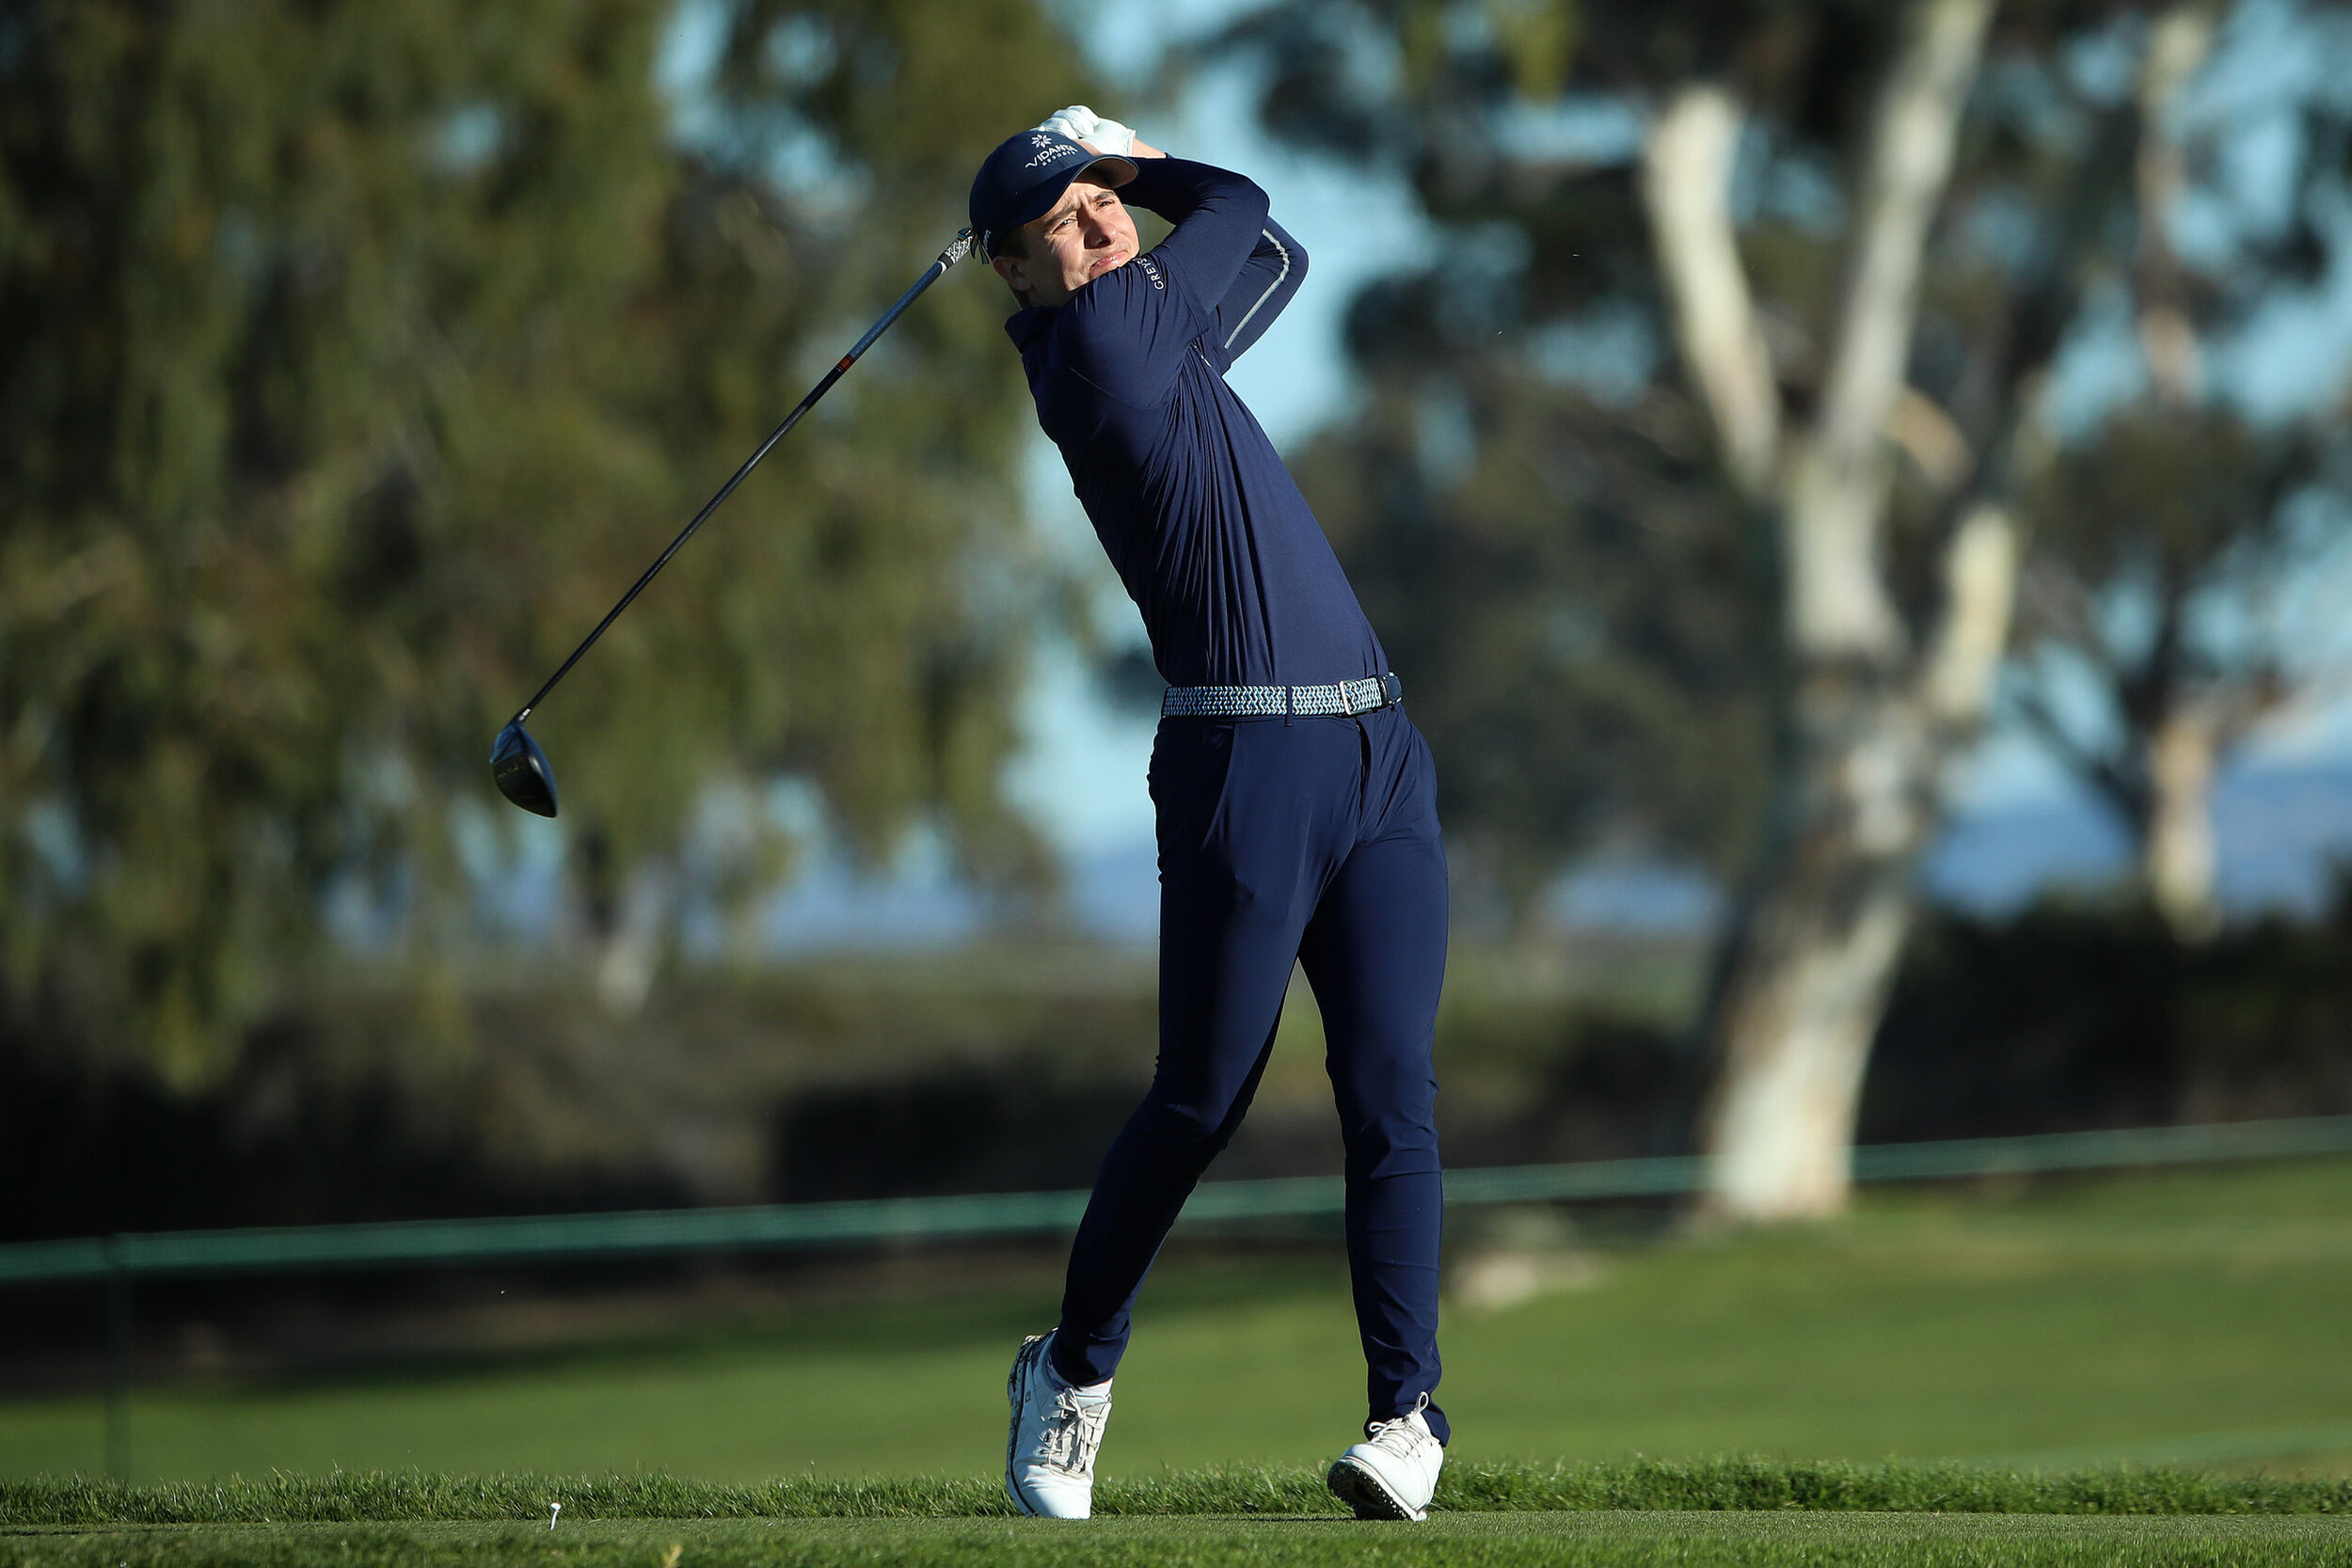  SAN DIEGO, CALIFORNIA - JANUARY 30: Carlos Ortiz hits his tee shot on the 2nd hole during round three of the Farmers Insurance Open at Torrey Pines South on January 30, 2021 in San Diego, California. (Photo by Katelyn Mulcahy/Getty Images) 